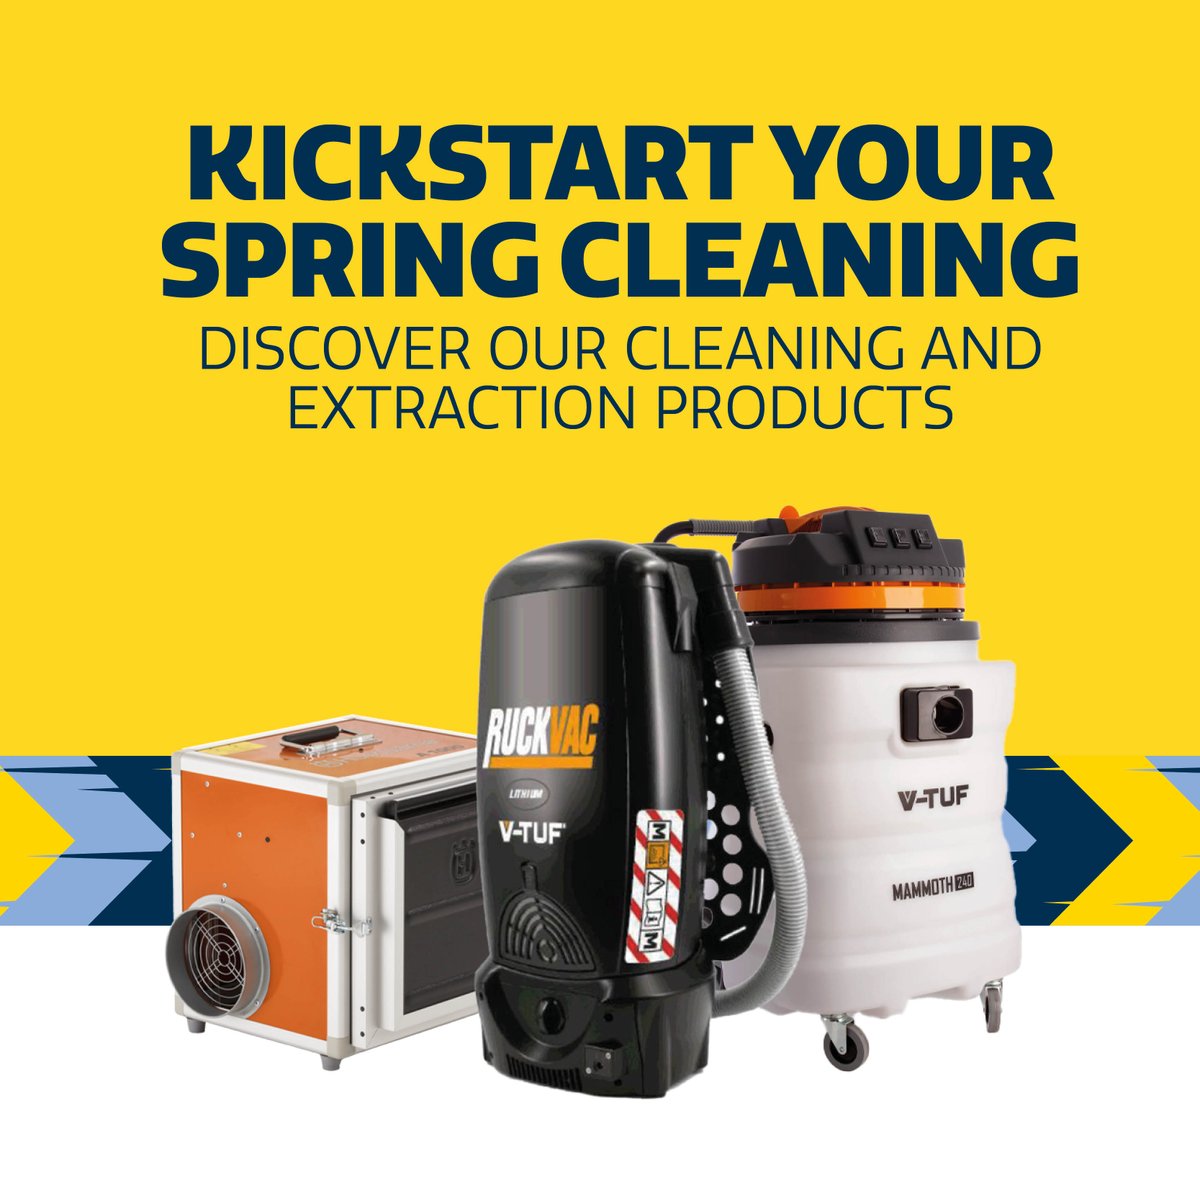 Kickstart your #springcleaning with our latest range of #cleaning and #extraction tools, such as the Air Cube Cleaners. Perfect for hard-to-reach areas. Keep your site spotless this spring 🤩: ow.ly/WU3O50NIS0W #TheHireman #ToolHire #EquipmentRental #ConstructionIndustry